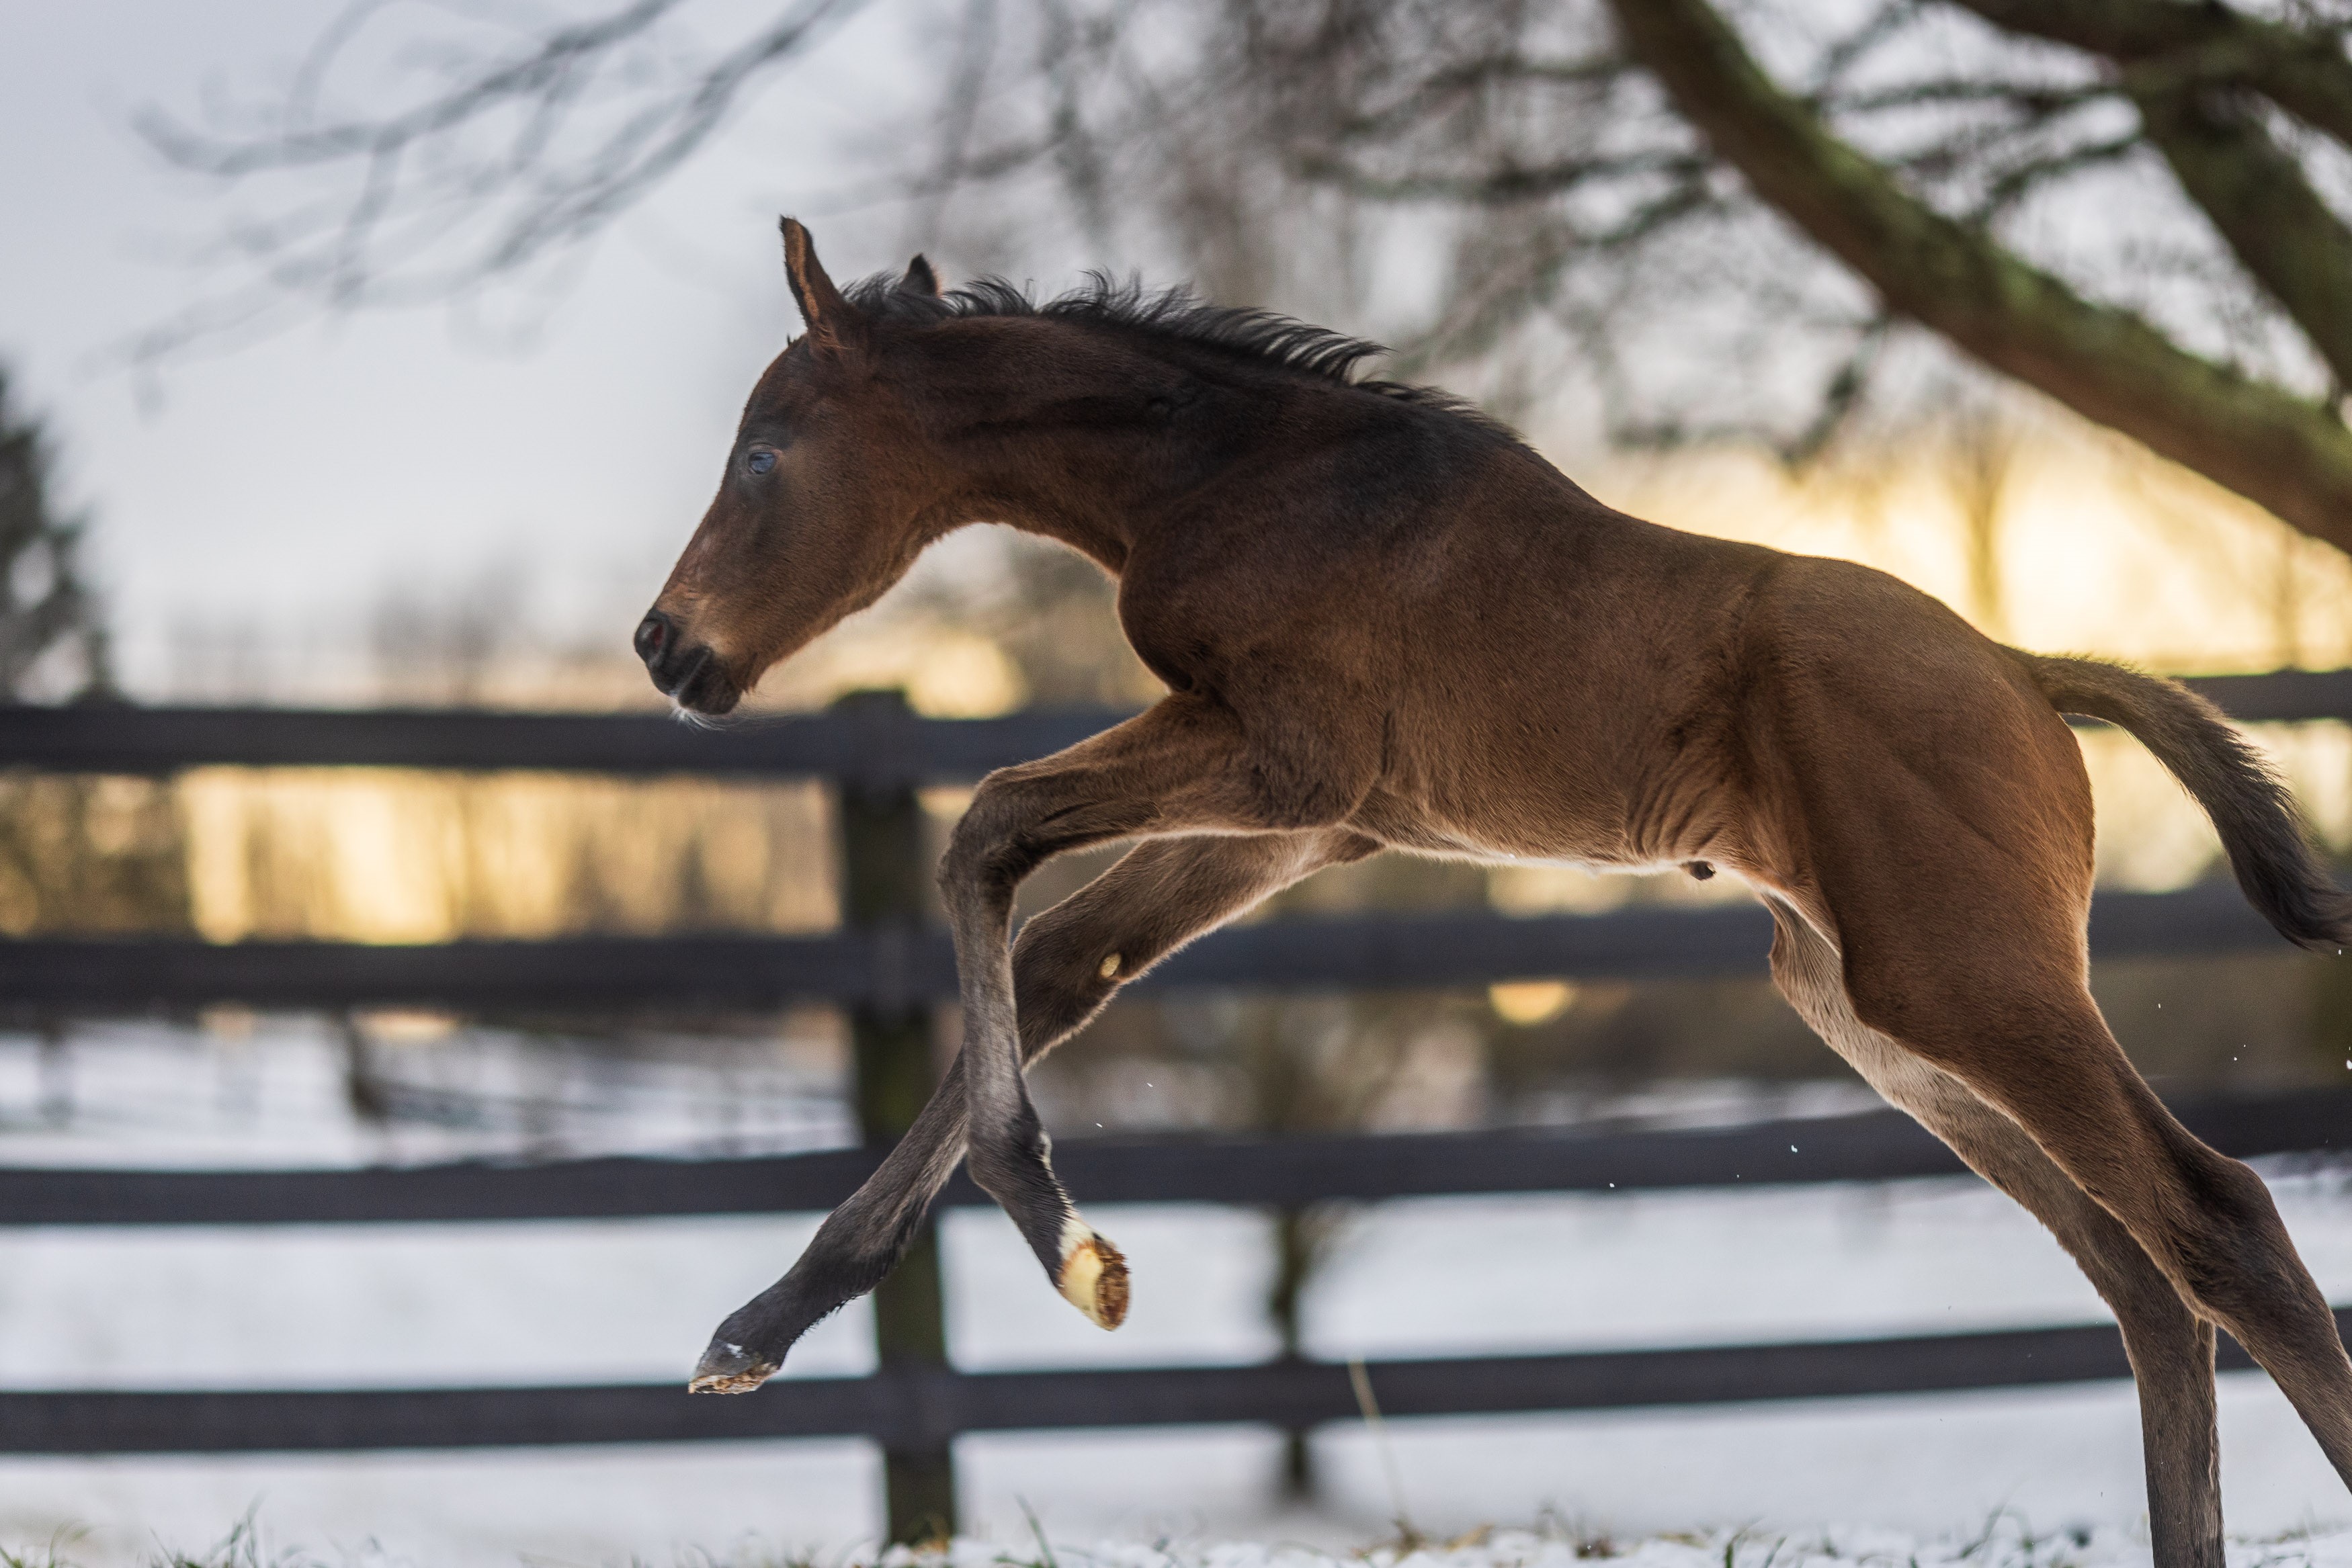 "The First Foal" (Mahoney Eden Manor, Saratoga Springs, NY - January 20, 2023), photograph by Samantha Decker